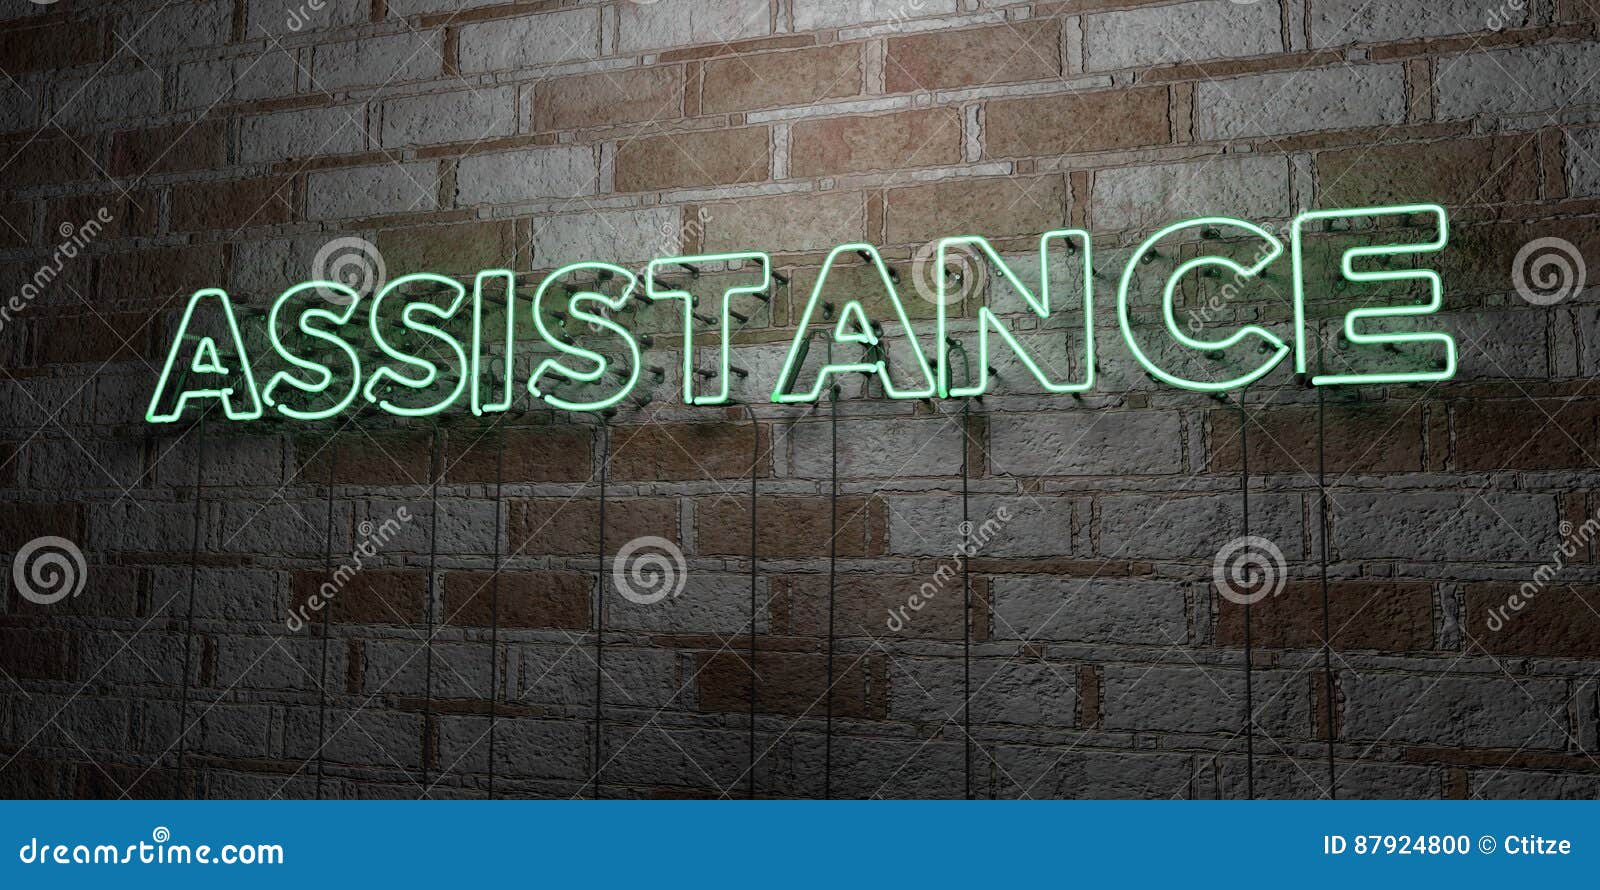 Assistance Glowing Neon Sign On Stonework Wall 3d Rendered Royalty